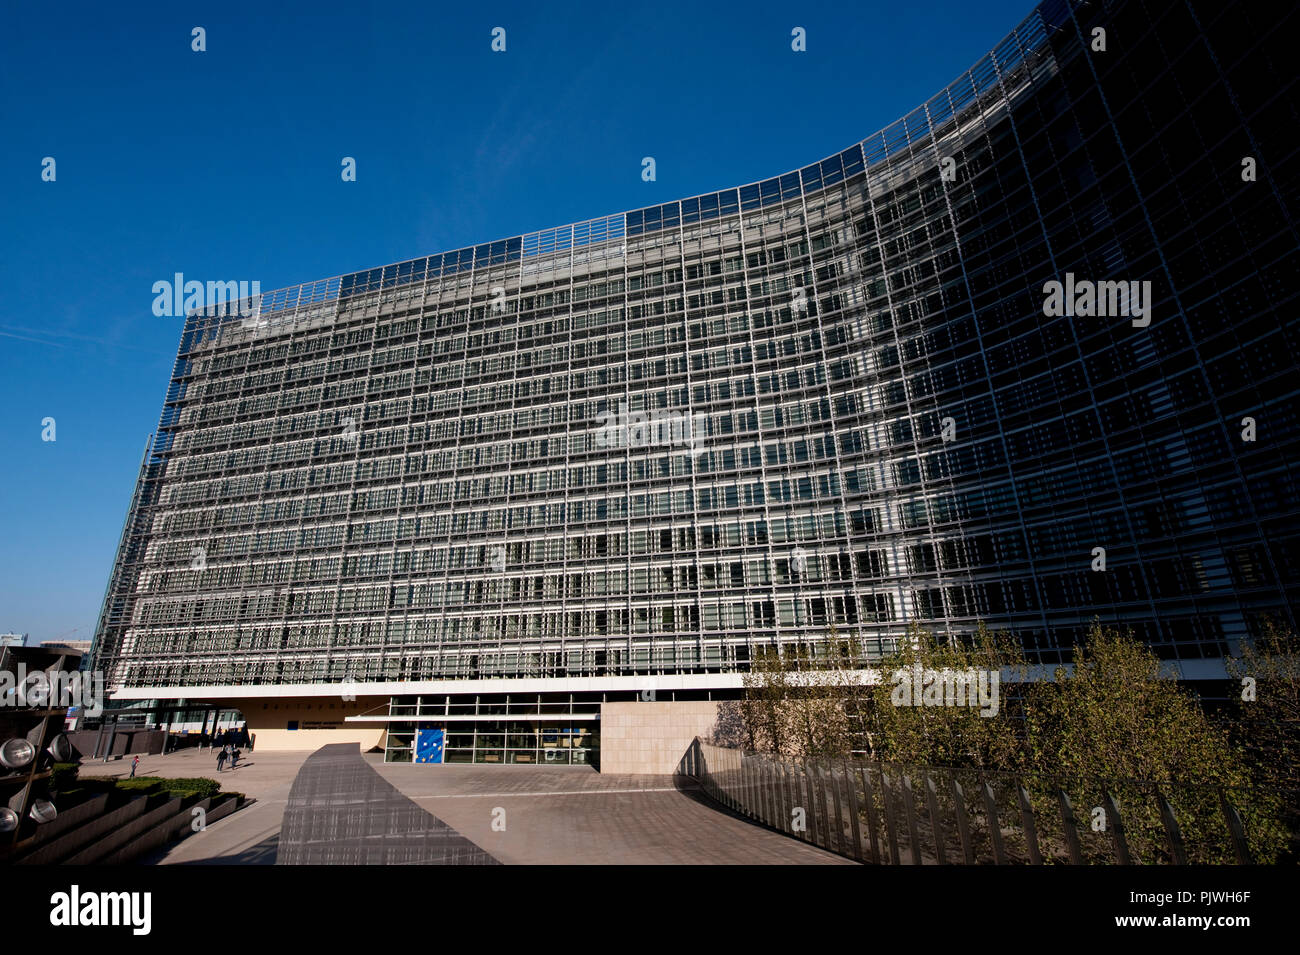 The Berlaymont building of the European Commission in Brussels (Belgium, 22/10/2011) NOT TO BE USED WITHOUT PRIOR CONSENT FROM SABAM Stock Photo